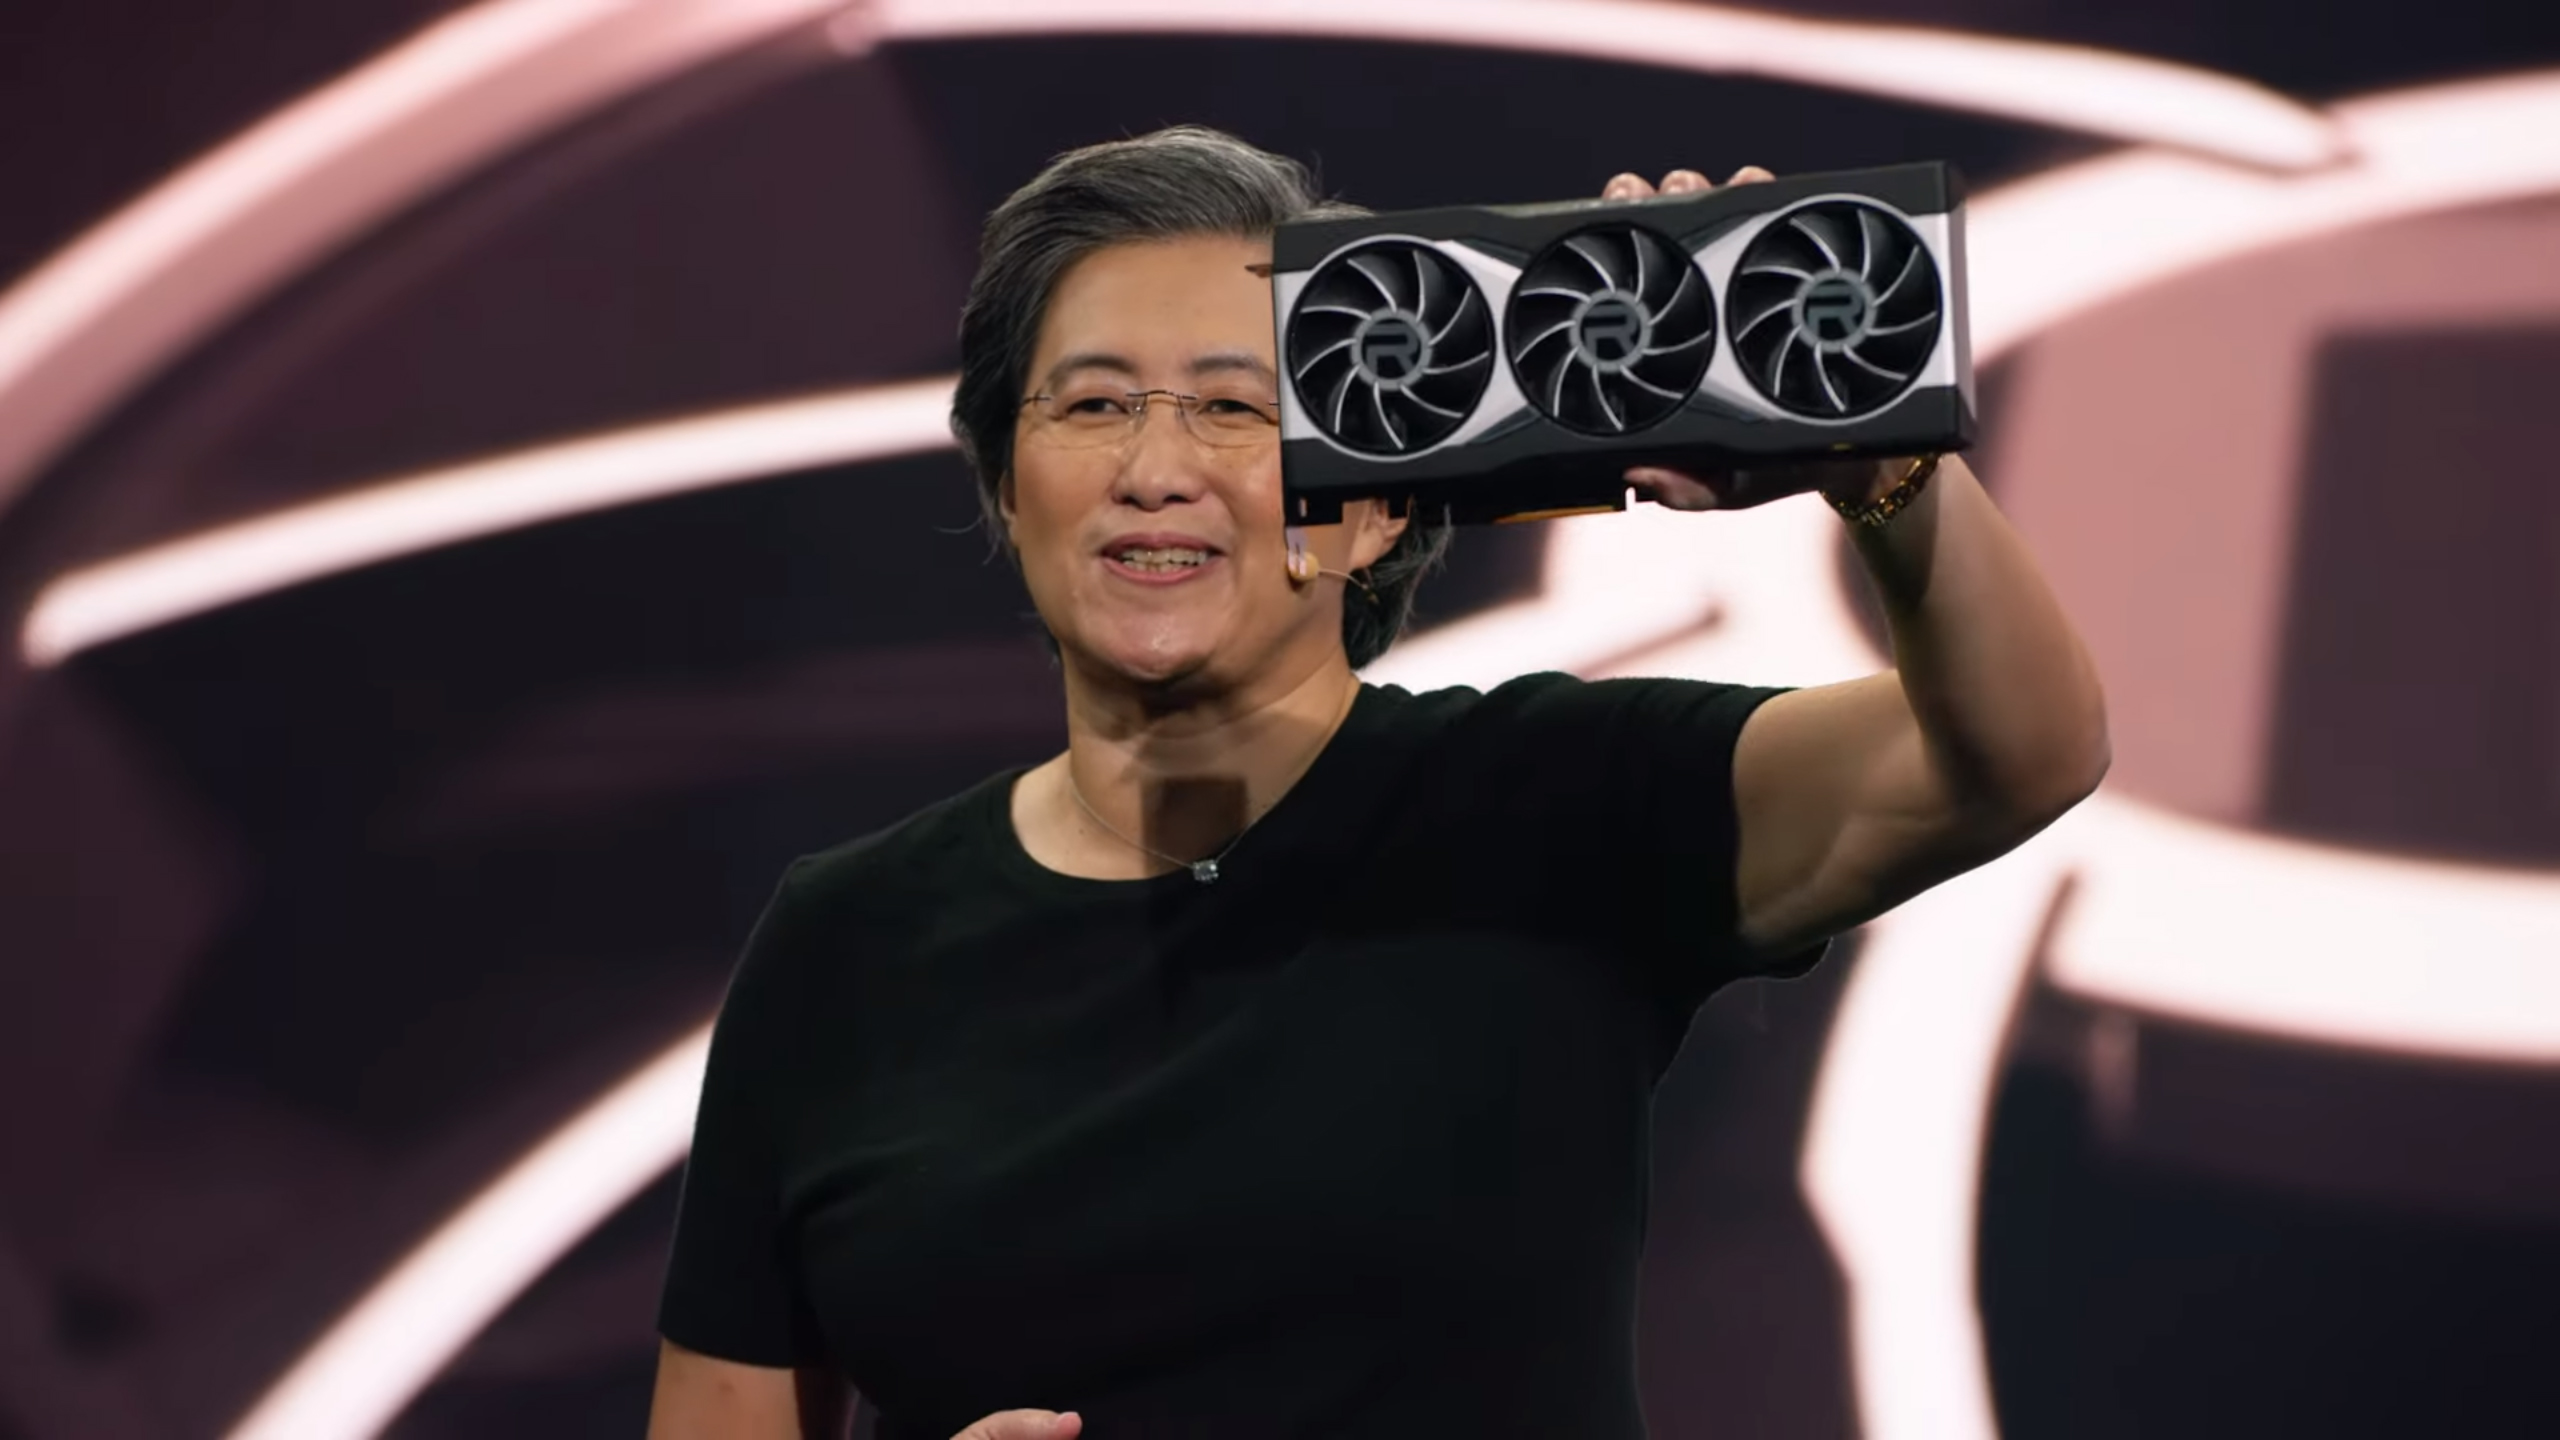 AMD Radeon RX 6800 XT & RX 6800 Reportedly Have 'Terrible' Launch Stock